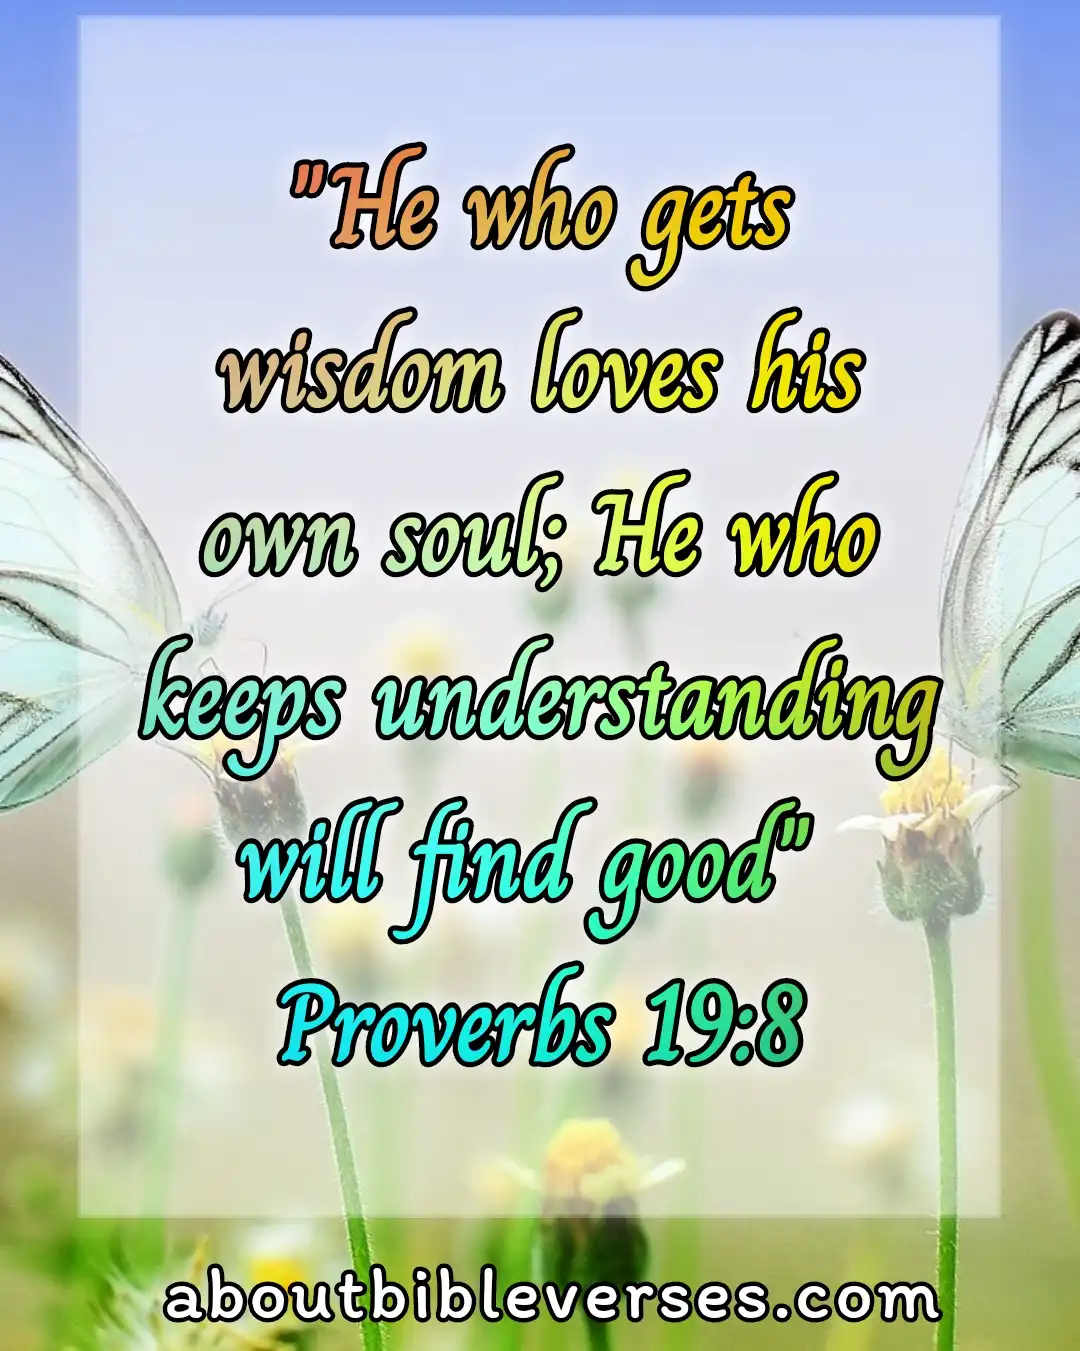 bible verses about wisdom (Proverbs 19:8)